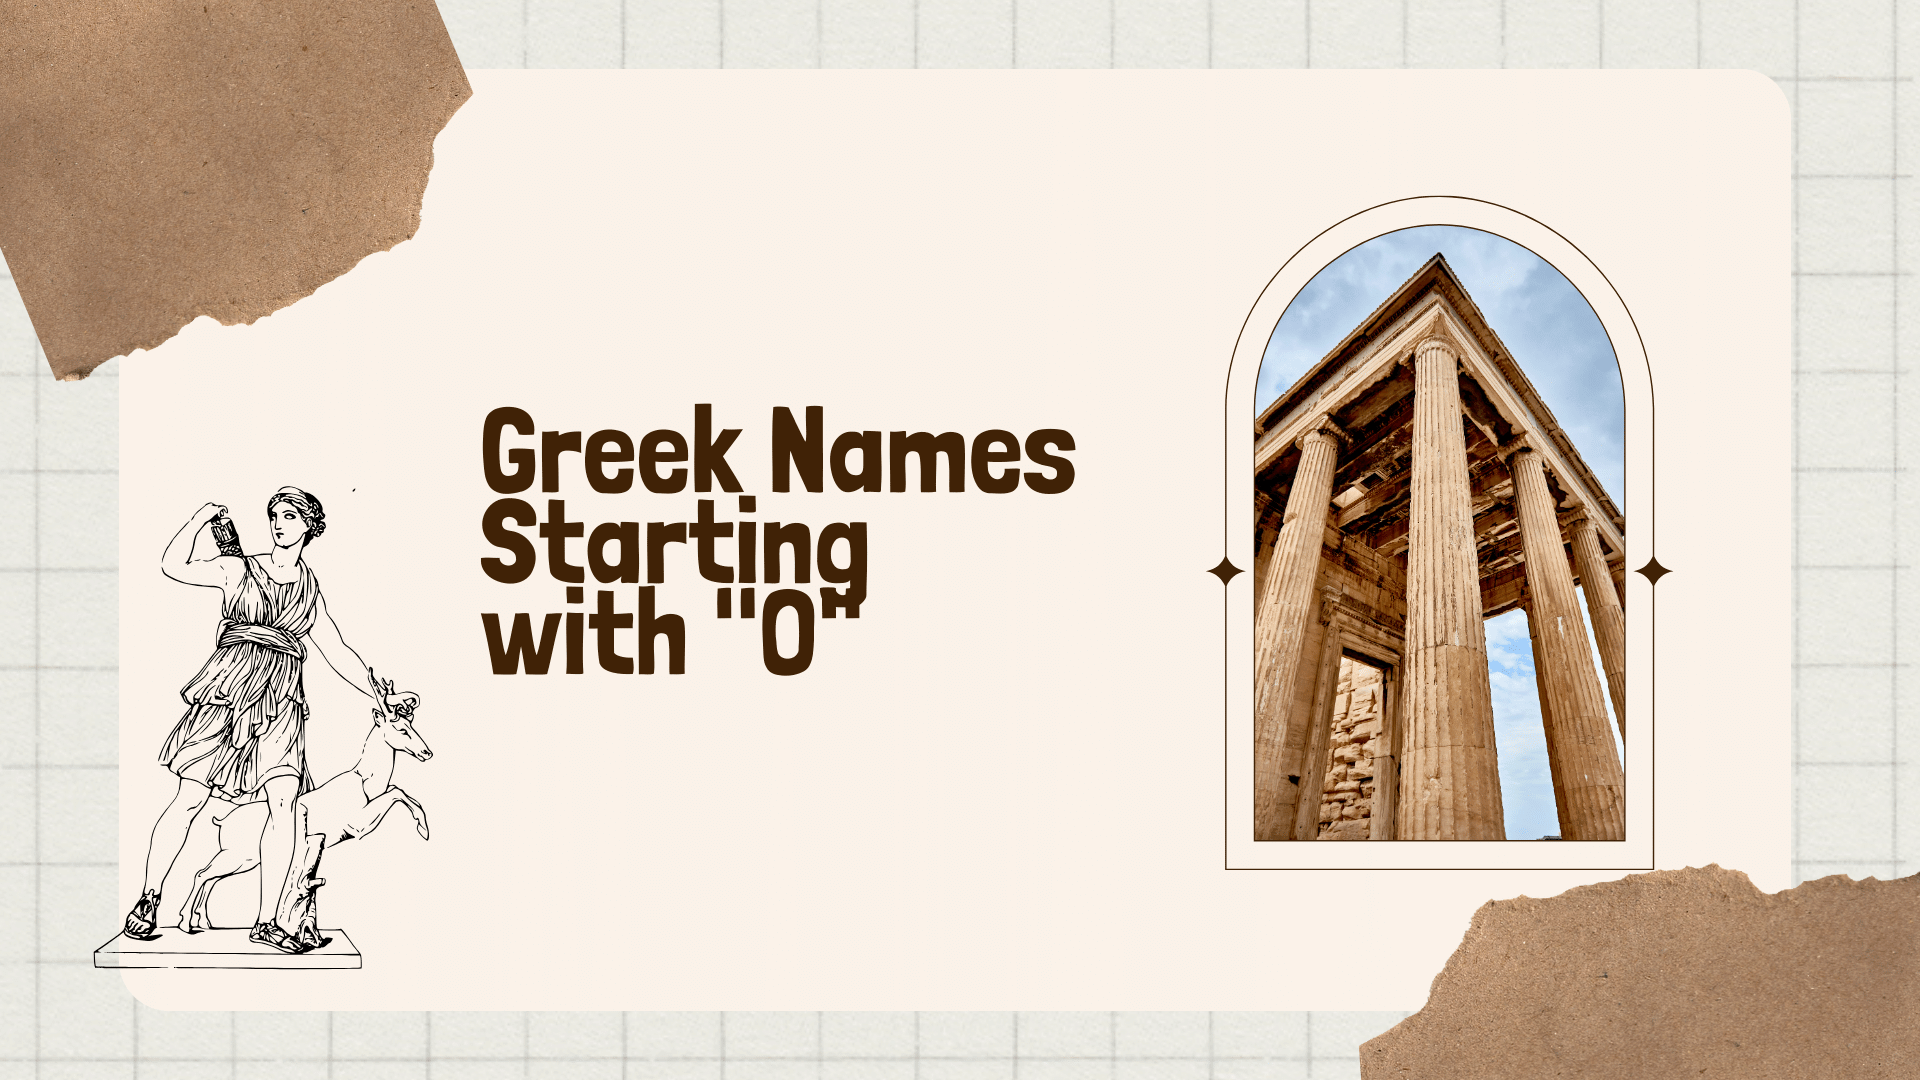 Greek Names Starting With "O"